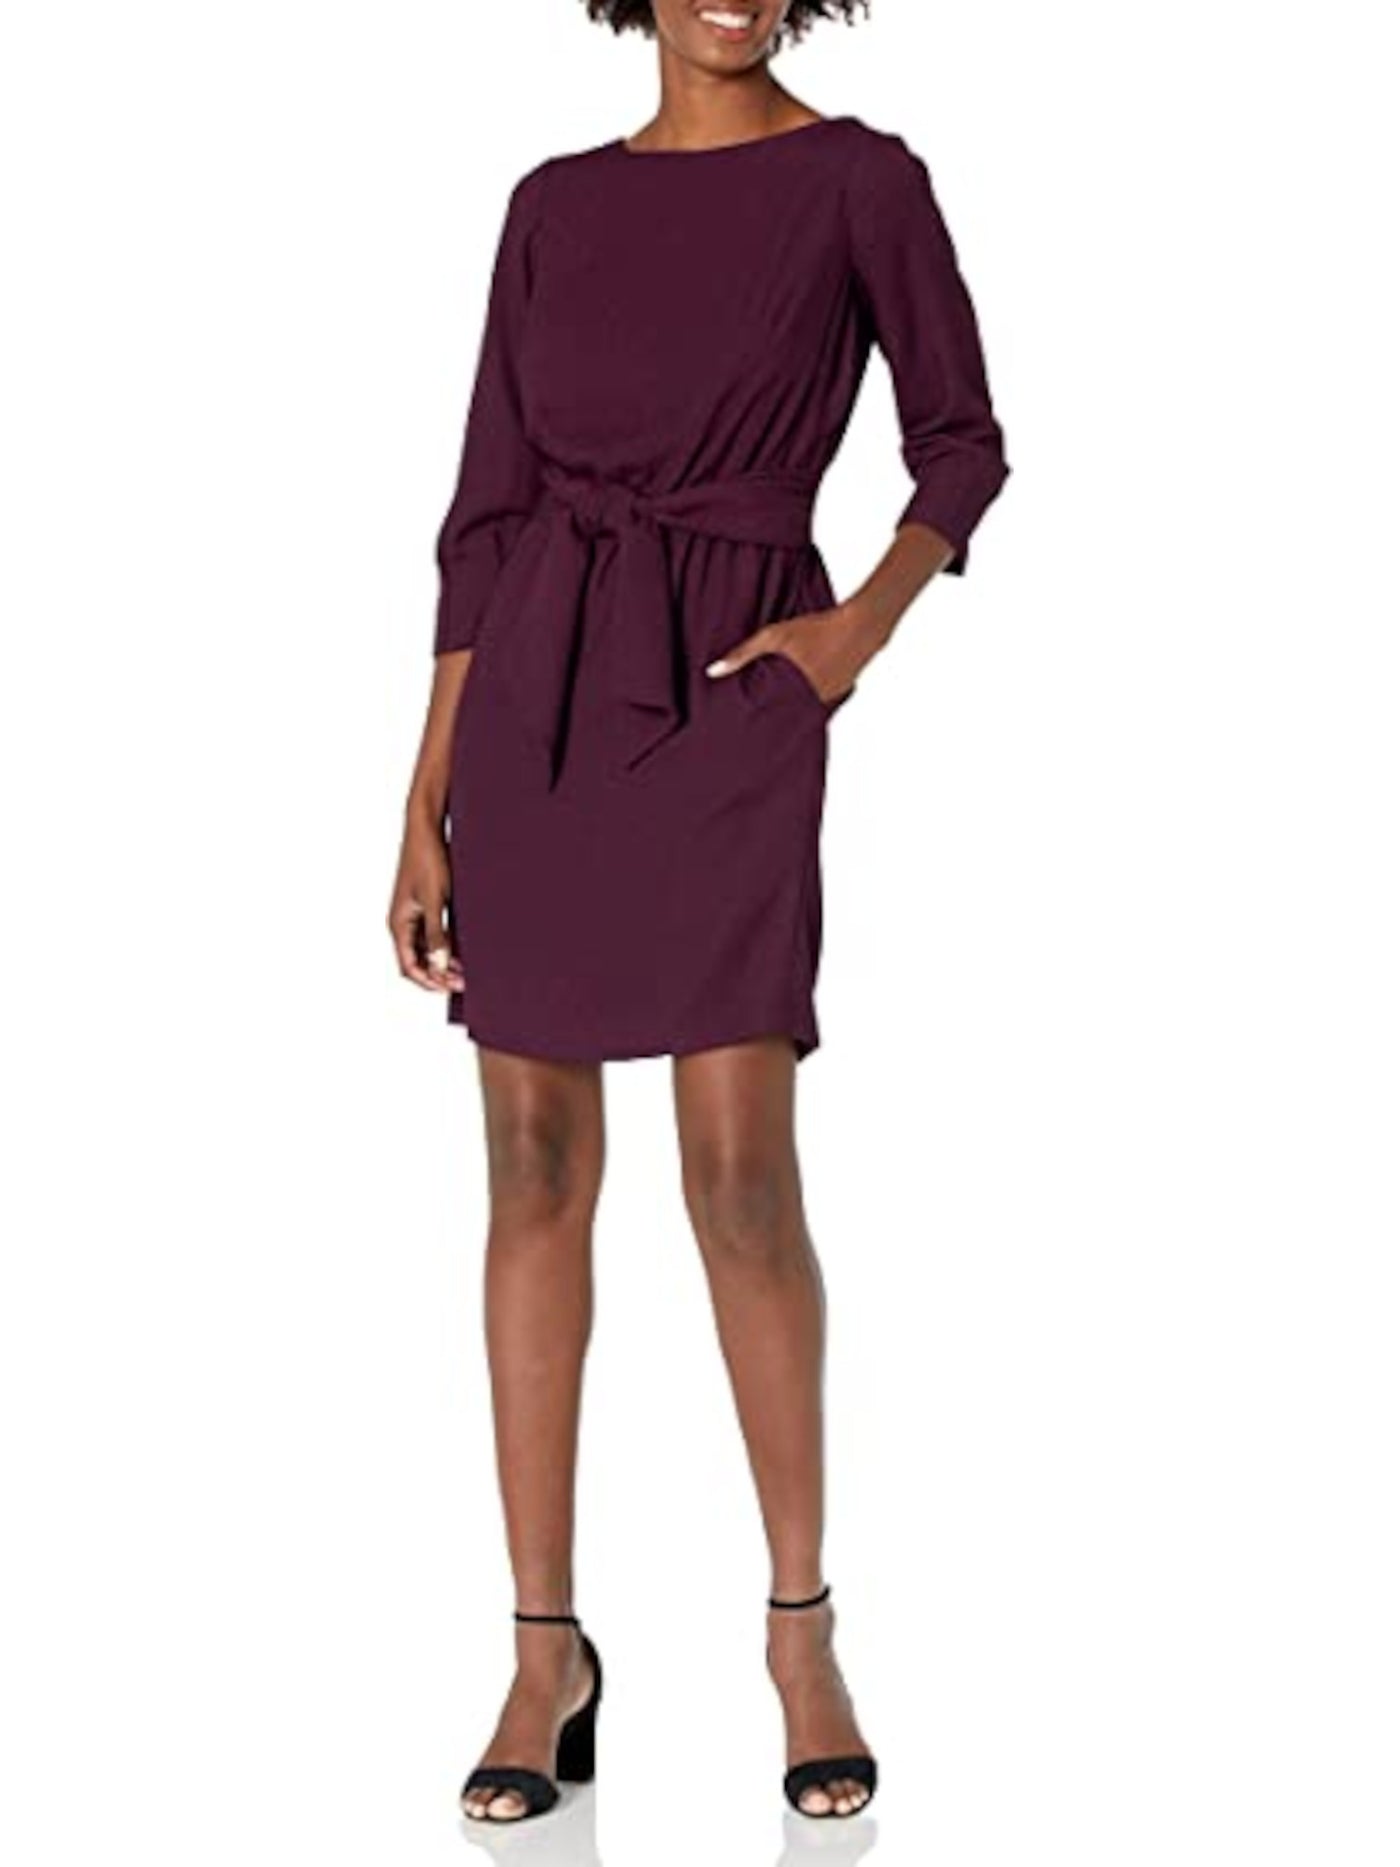 VINCE CAMUTO Womens Purple Smocked Pleated Self Tie Waist Scuba Crepe Butto 3/4 Sleeve Boat Neck Above The Knee Wear To Work Sheath Dress Petites 0P